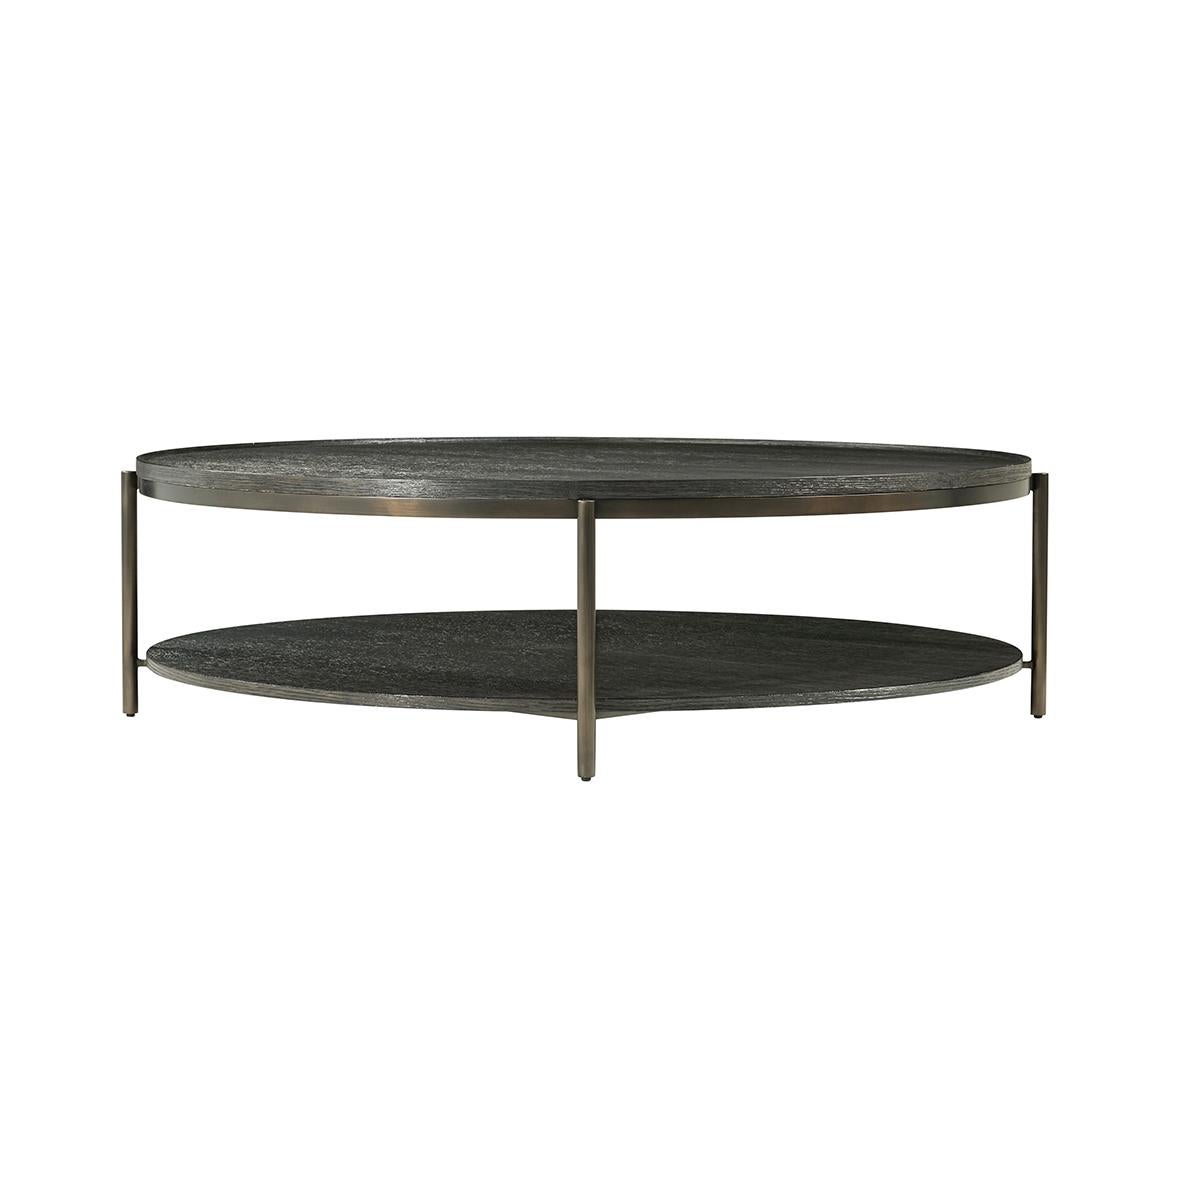 Vietnamese Modern Charcoal Oak Round Coffee Table For Sale